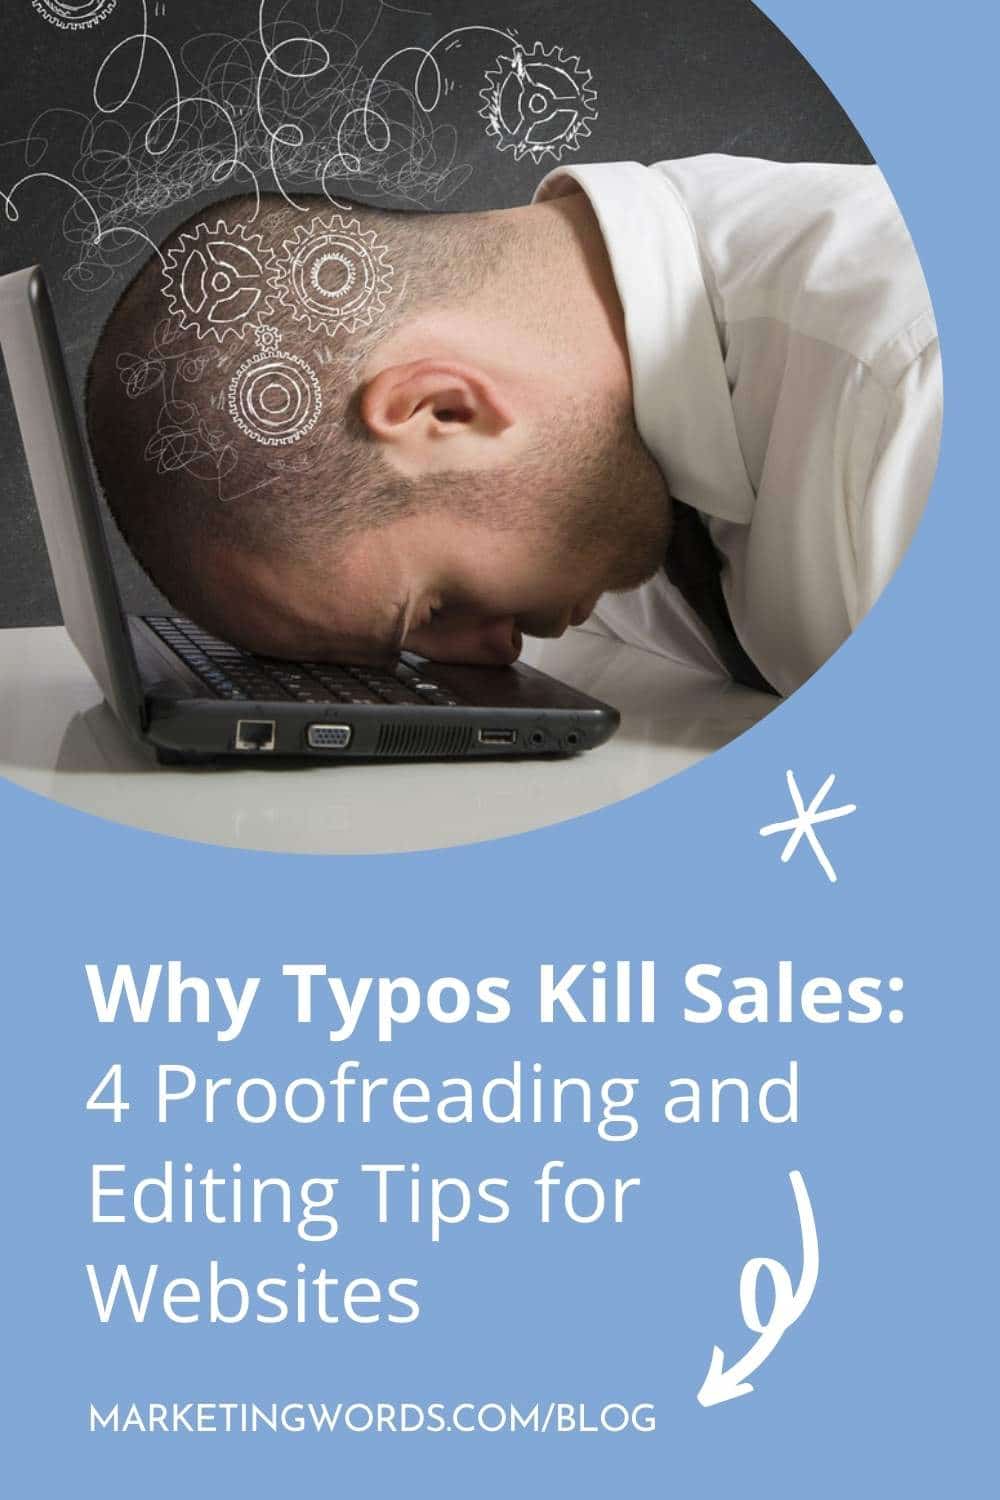 Why Typos Kill Sales: 4 Proofreading and Editing Tips for Websites